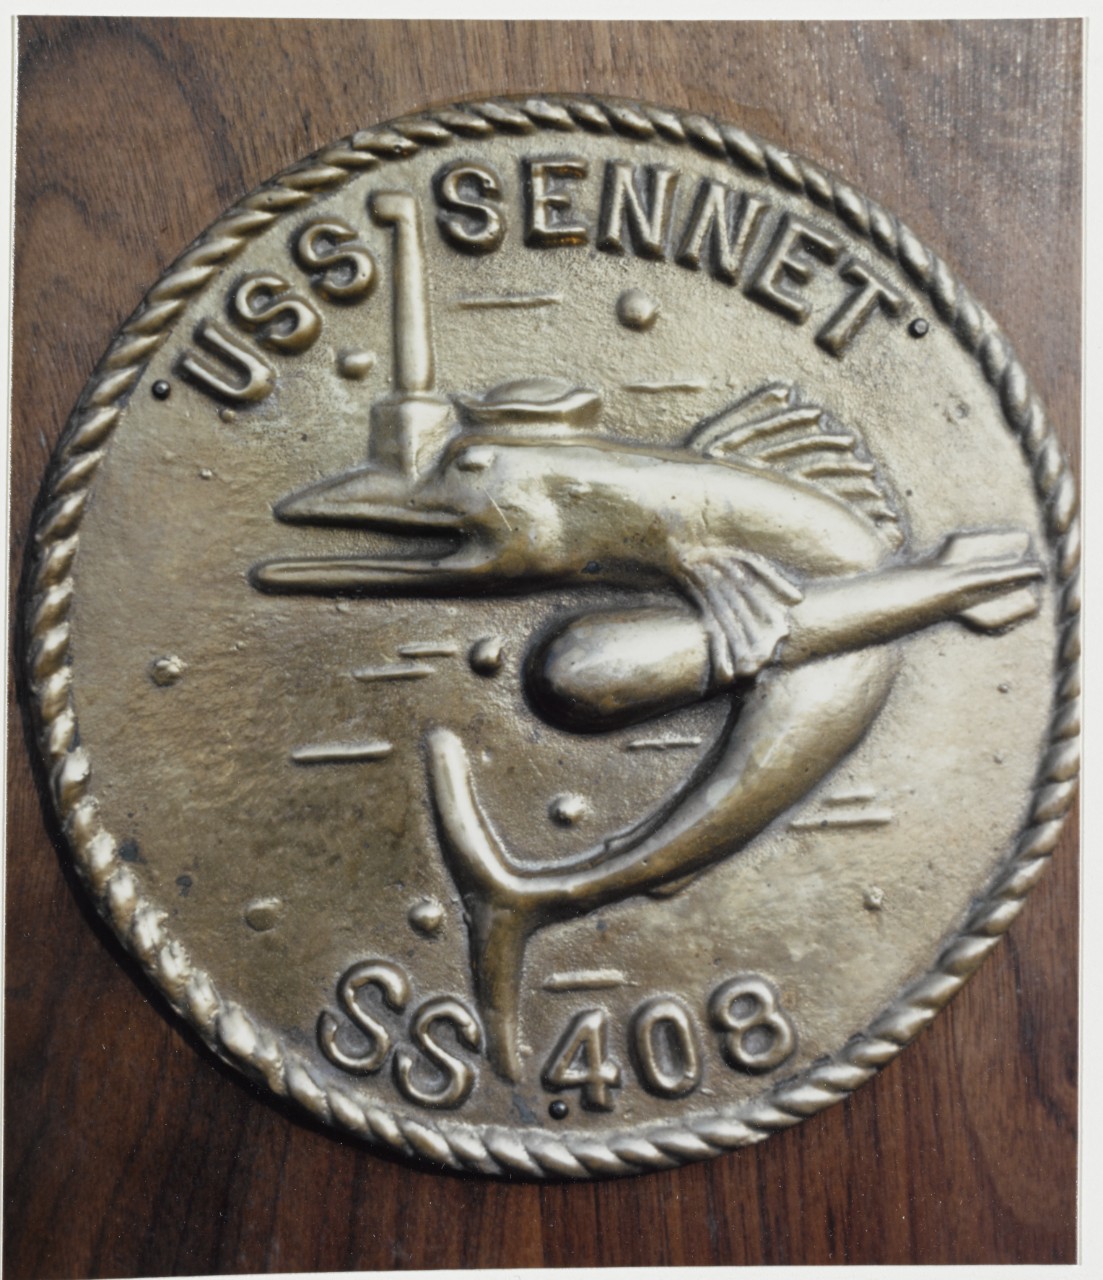 Insignia: USS SENNET (SS-408) Plaque received in 1968.